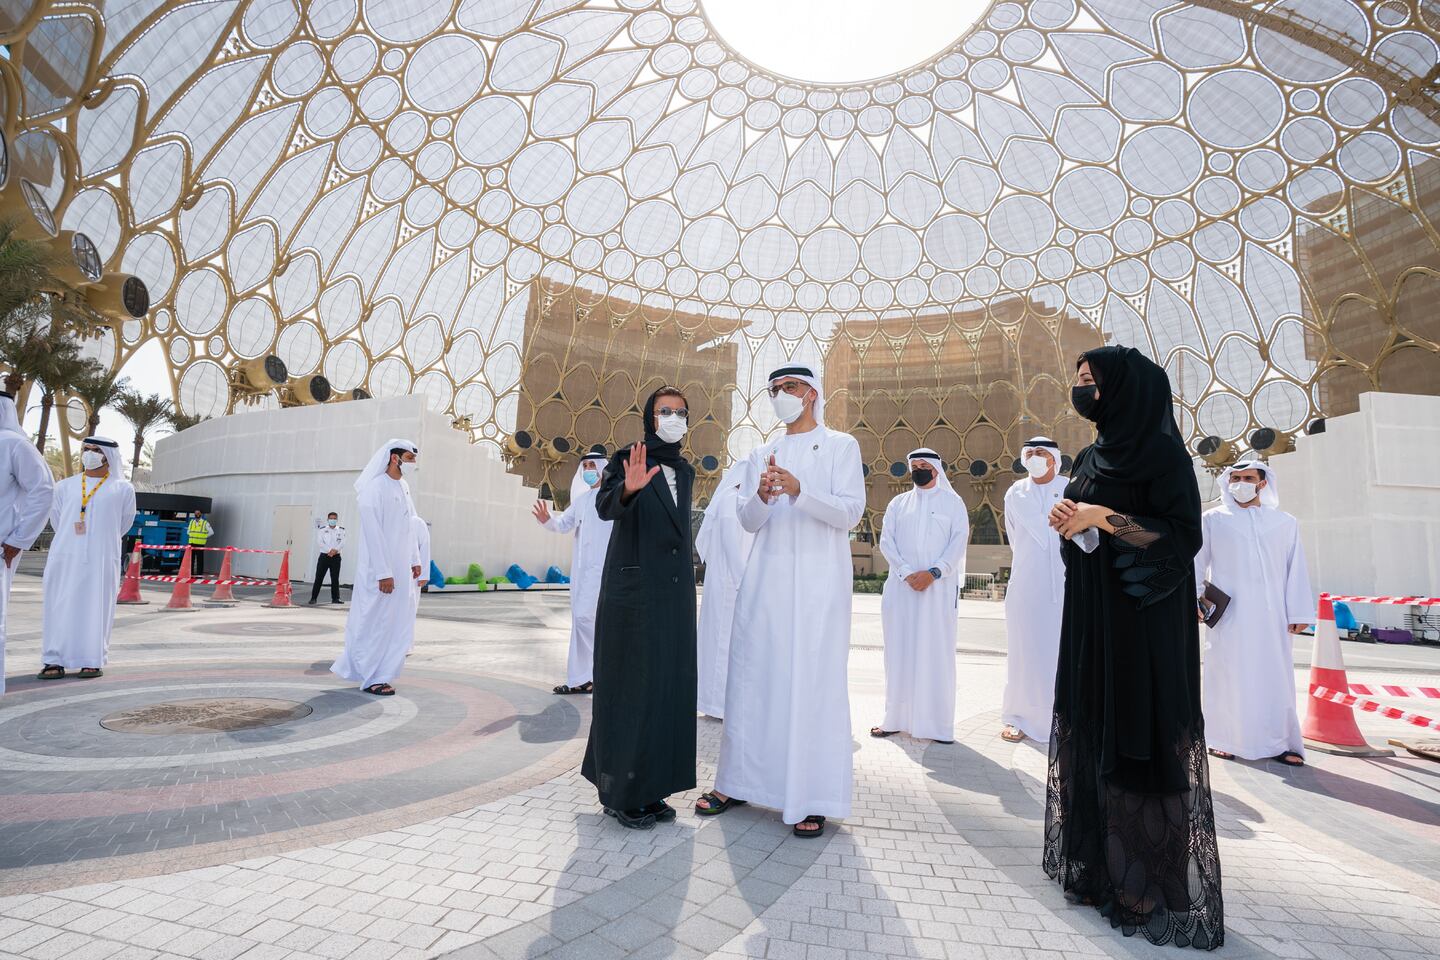 Expo 2020, which begins next month, will bring private-sector entities from all over the world to the UAE. Abu Dhabi Media Office